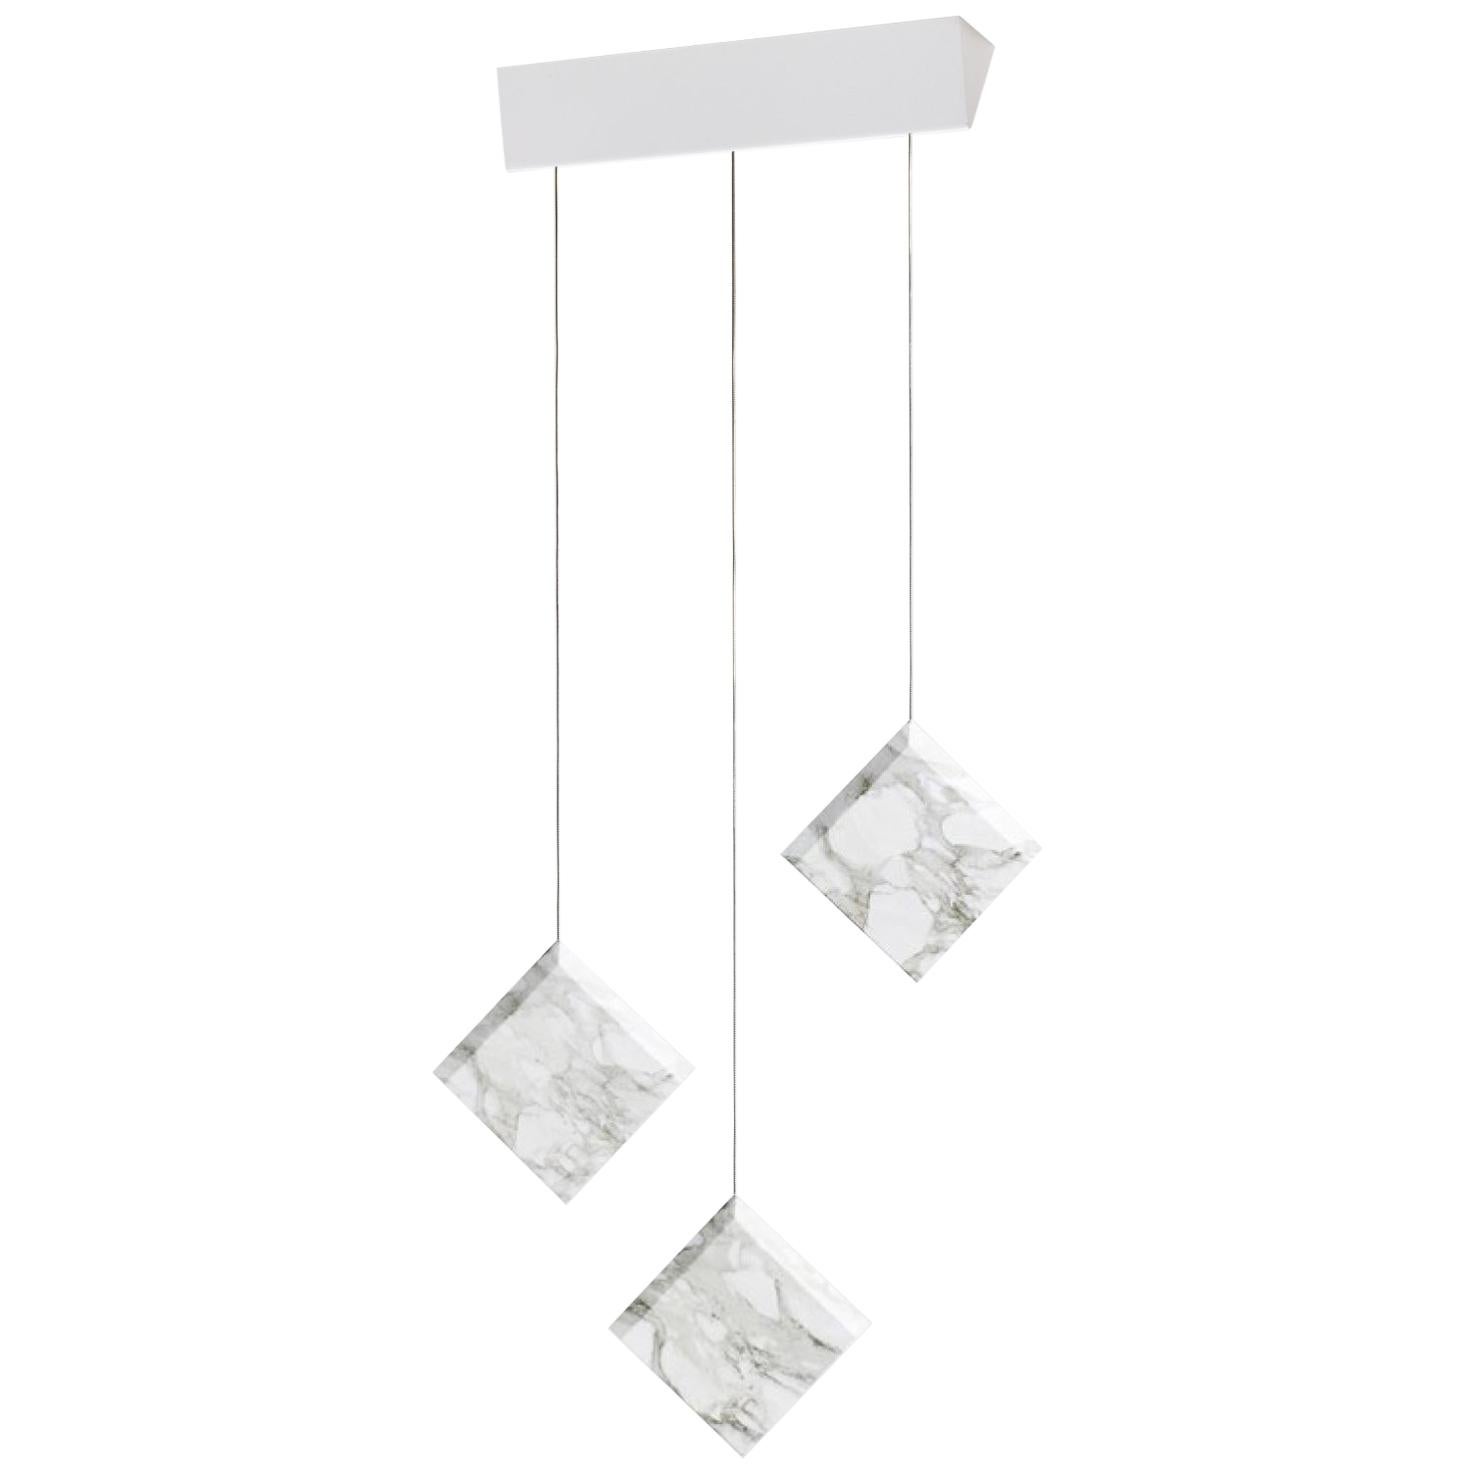 Marble Ceiling lamp "Werner Jr. Carrara" White Mount in Stock For Sale